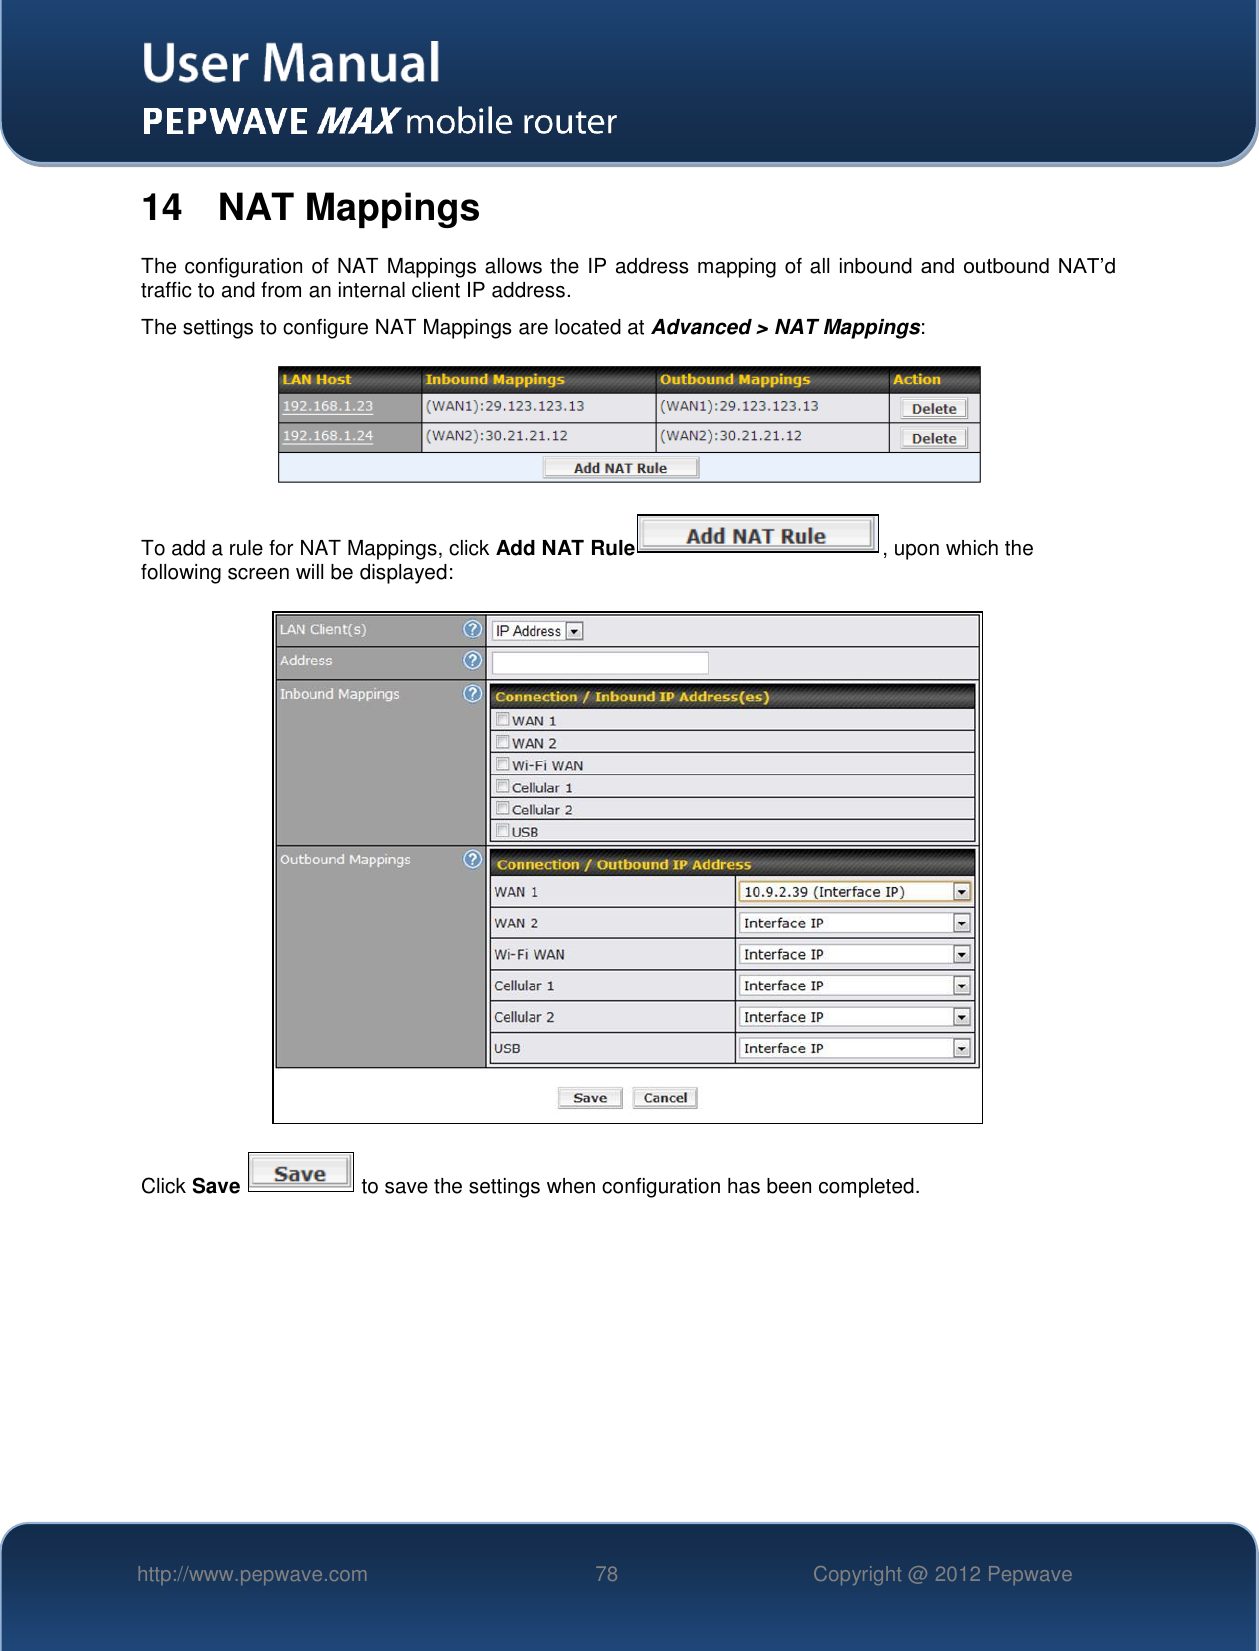   http://www.pepwave.com 78 Copyright @ 2012 Pepwave   14  NAT Mappings The configuration of NAT Mappings allows the IP address mapping of all inbound and outbound NAT’d traffic to and from an internal client IP address.   The settings to configure NAT Mappings are located at Advanced &gt; NAT Mappings:  To add a rule for NAT Mappings, click Add NAT Rule , upon which the following screen will be displayed:  Click Save   to save the settings when configuration has been completed.         